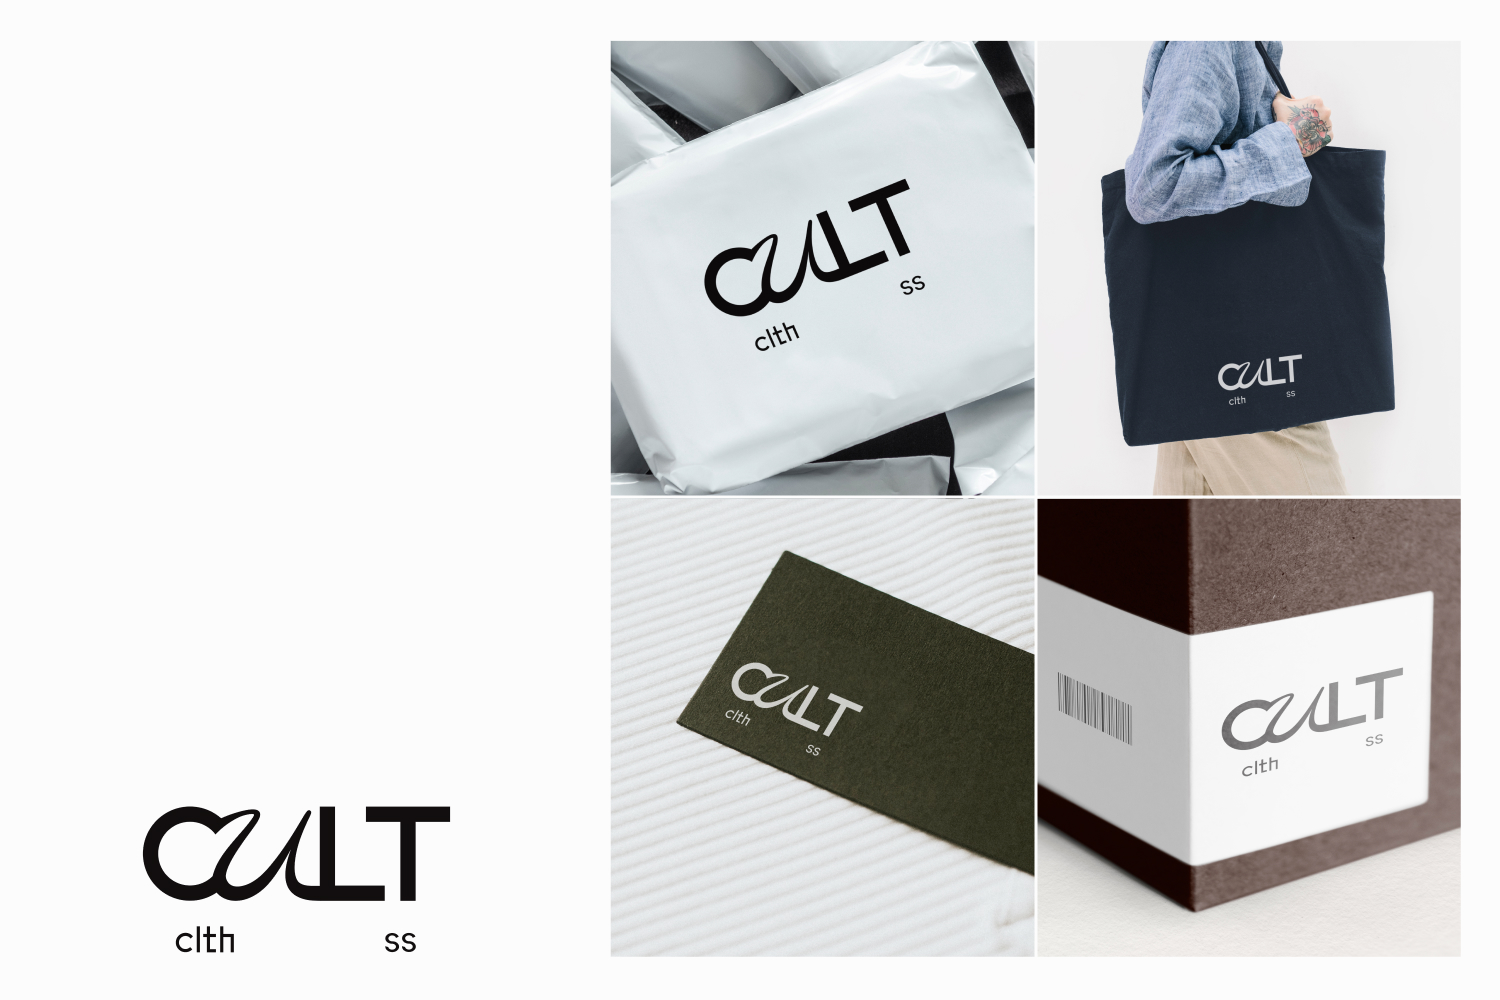 Collage of photos of objects with the Cult logo.